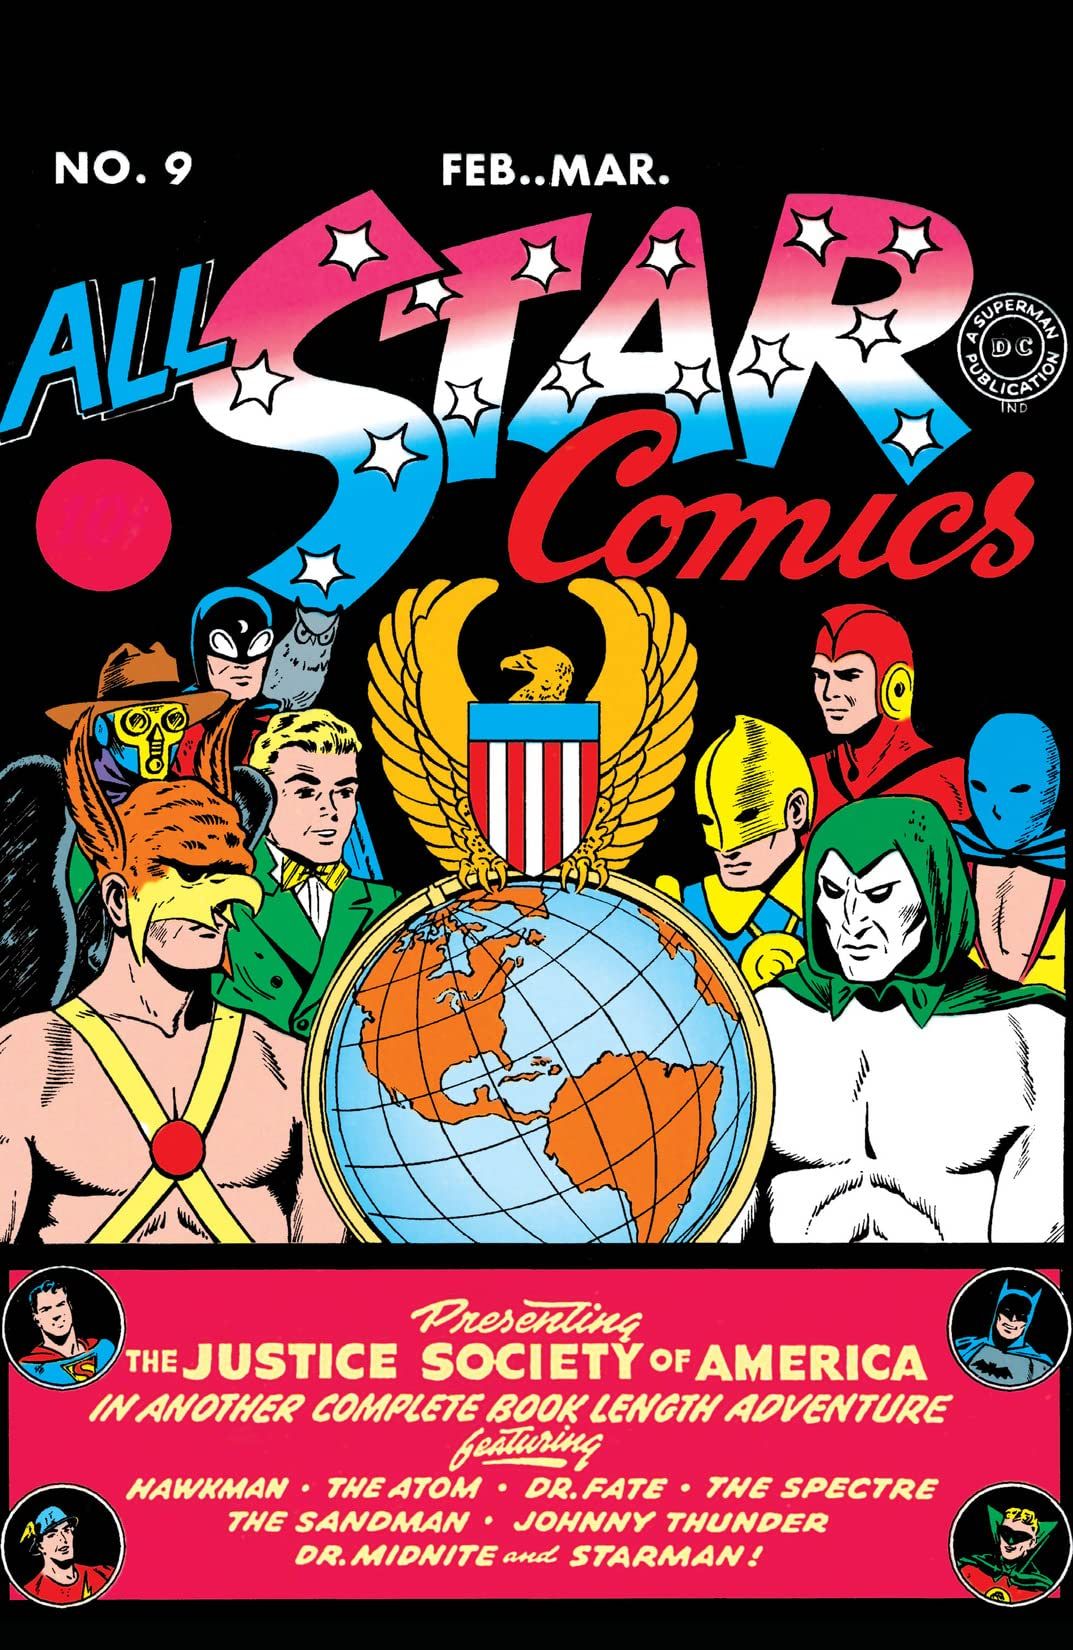 Justice Society on the cover of All-Star Comics #9